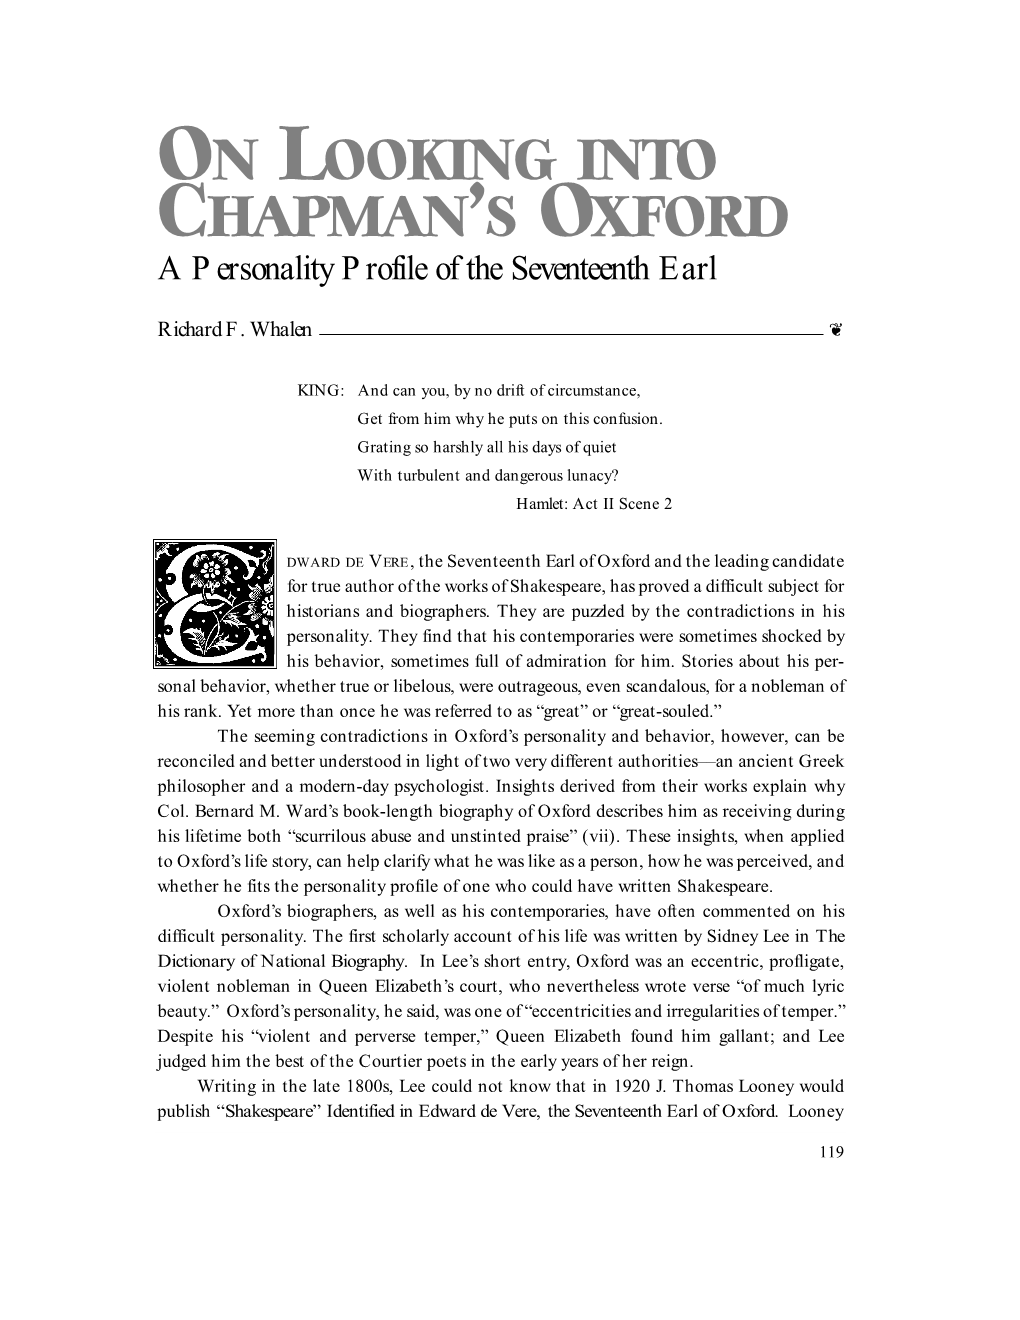 On Looking Into Chapman's Oxford